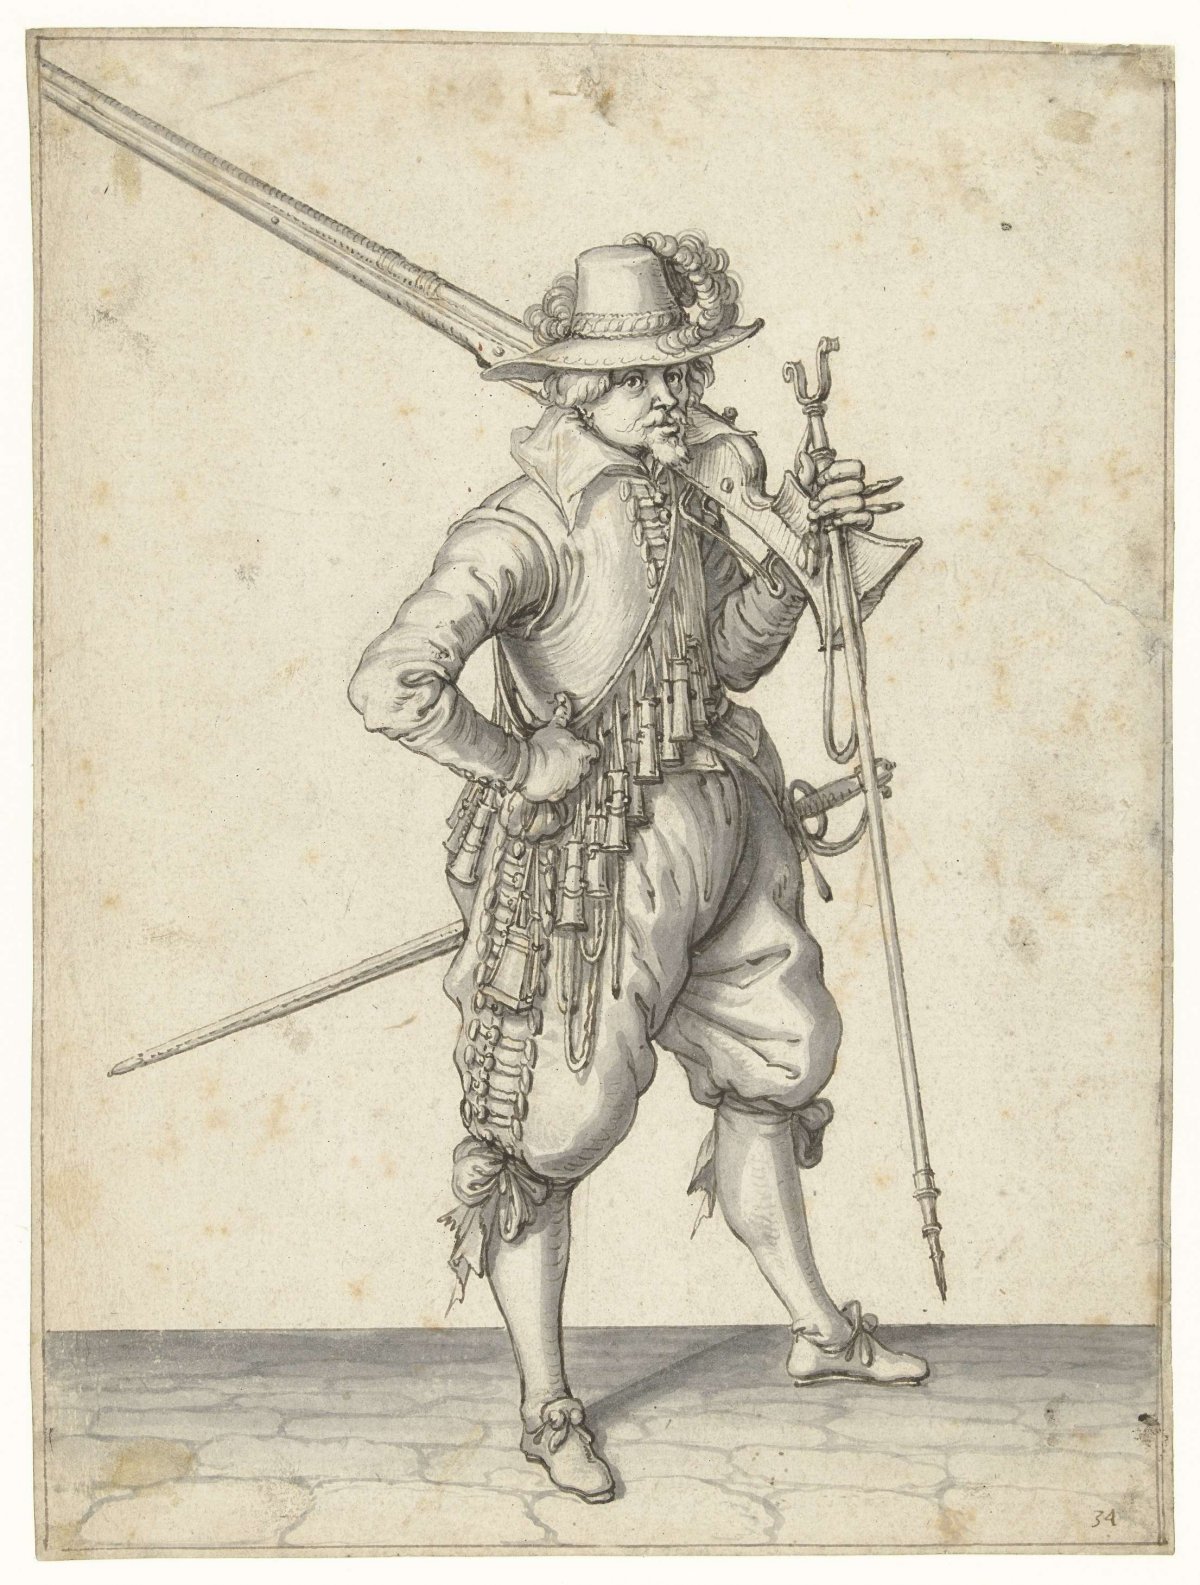 Soldier carrying his musket on his shoulder, Jacques de Gheyn (II), 1596 - 1606